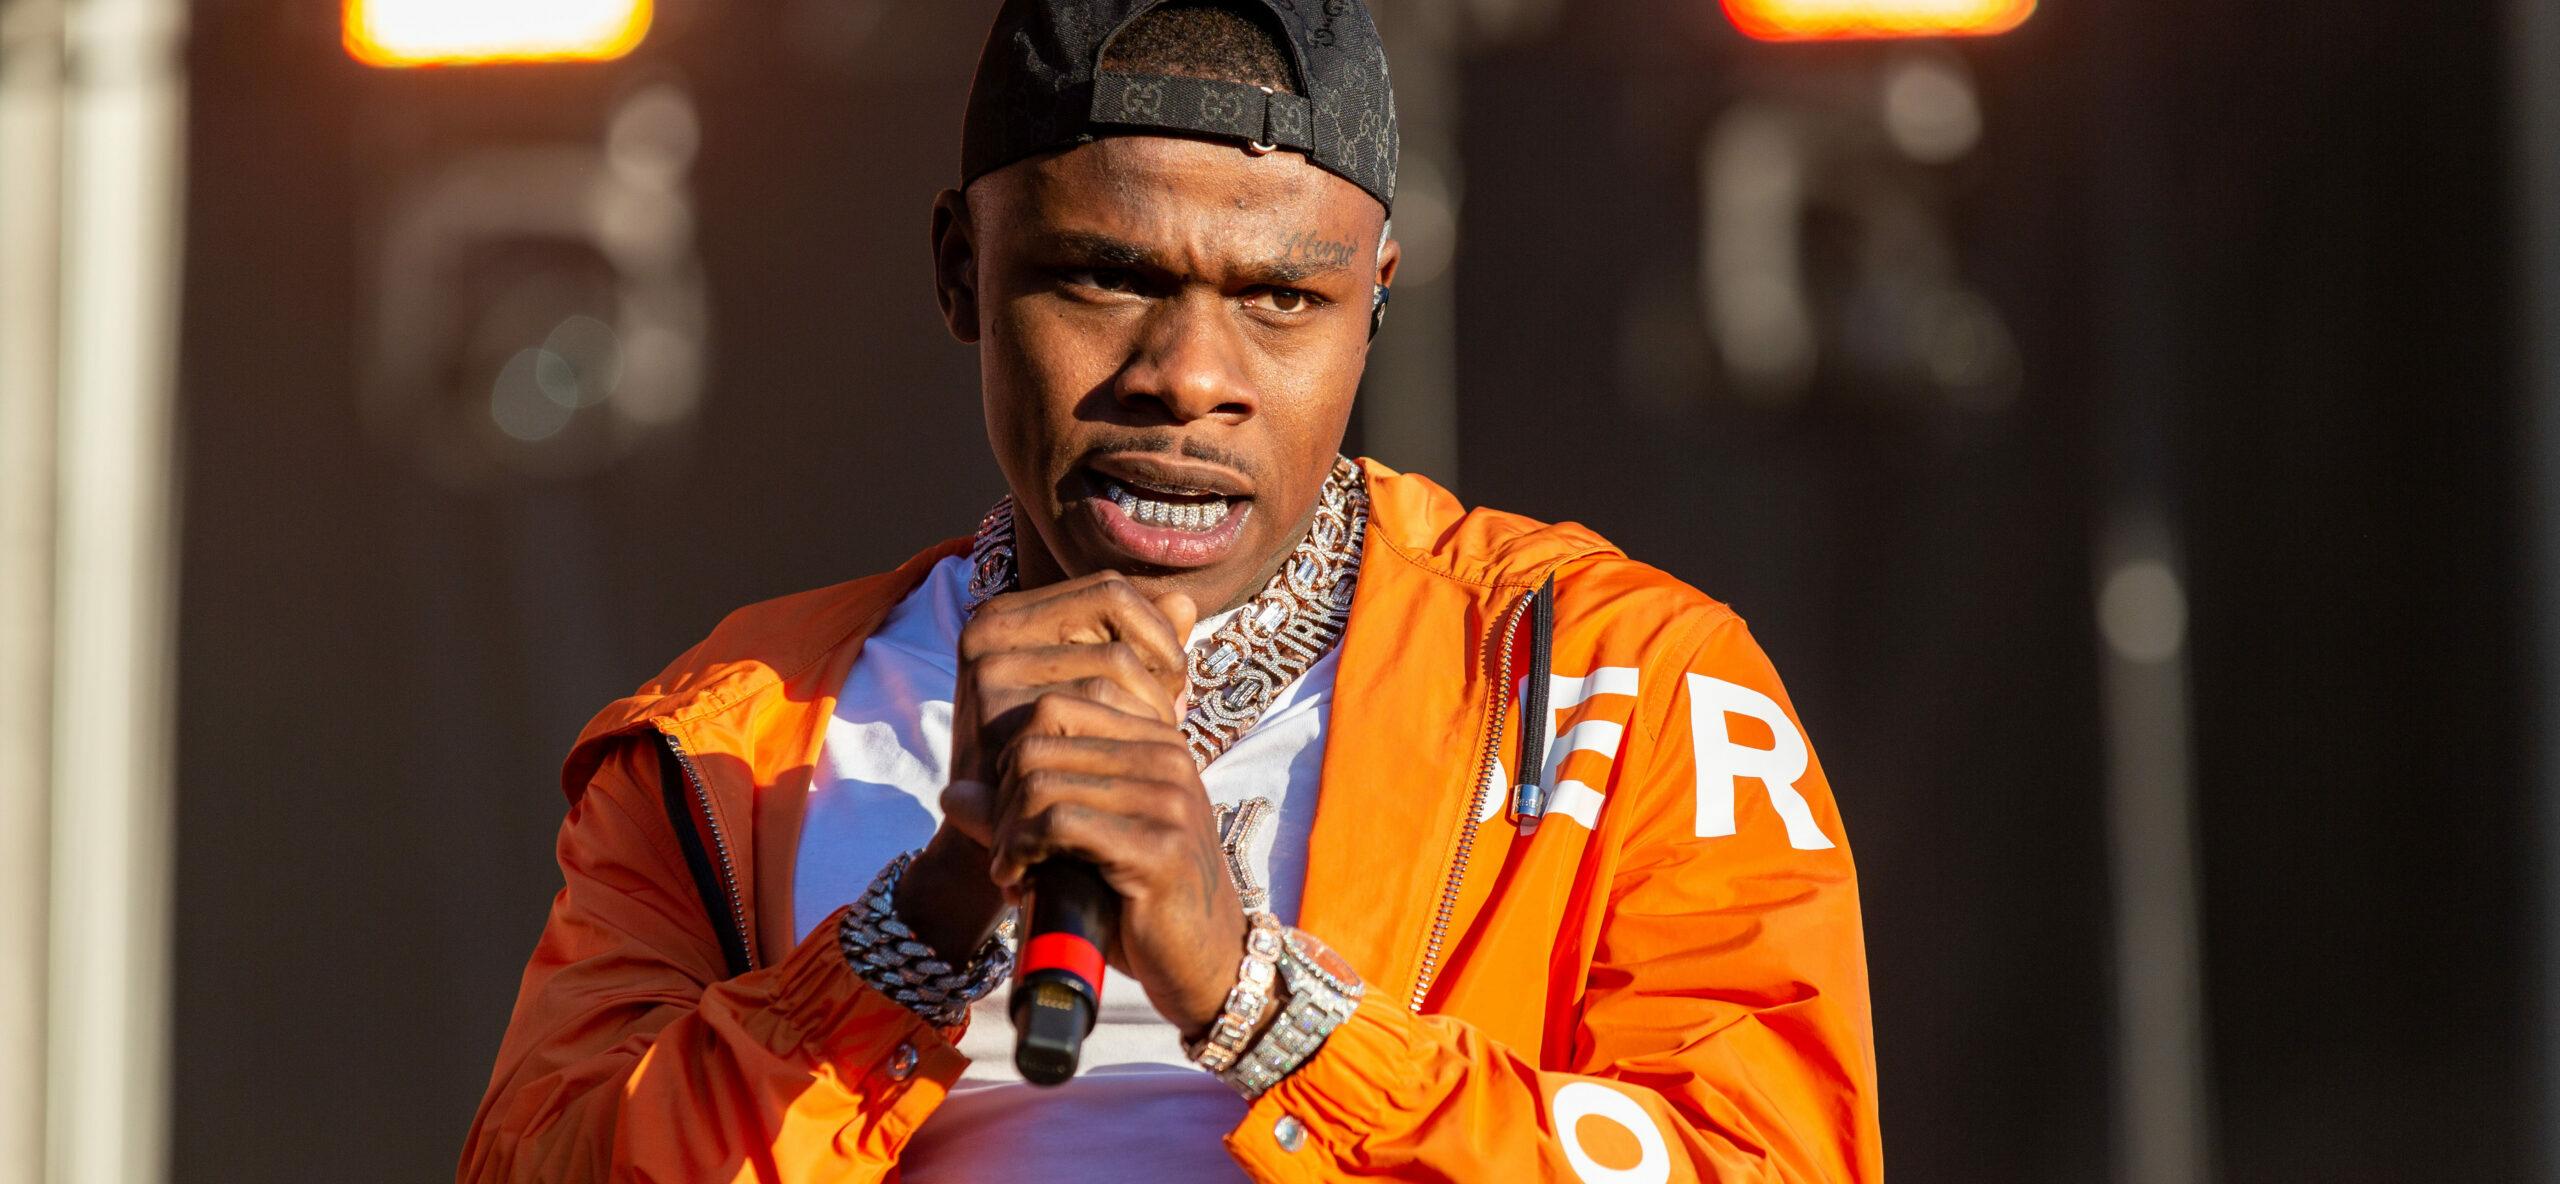 DaBaby Jokes He Is Becoming An R&B Singer After Being Canceled From Rap Music